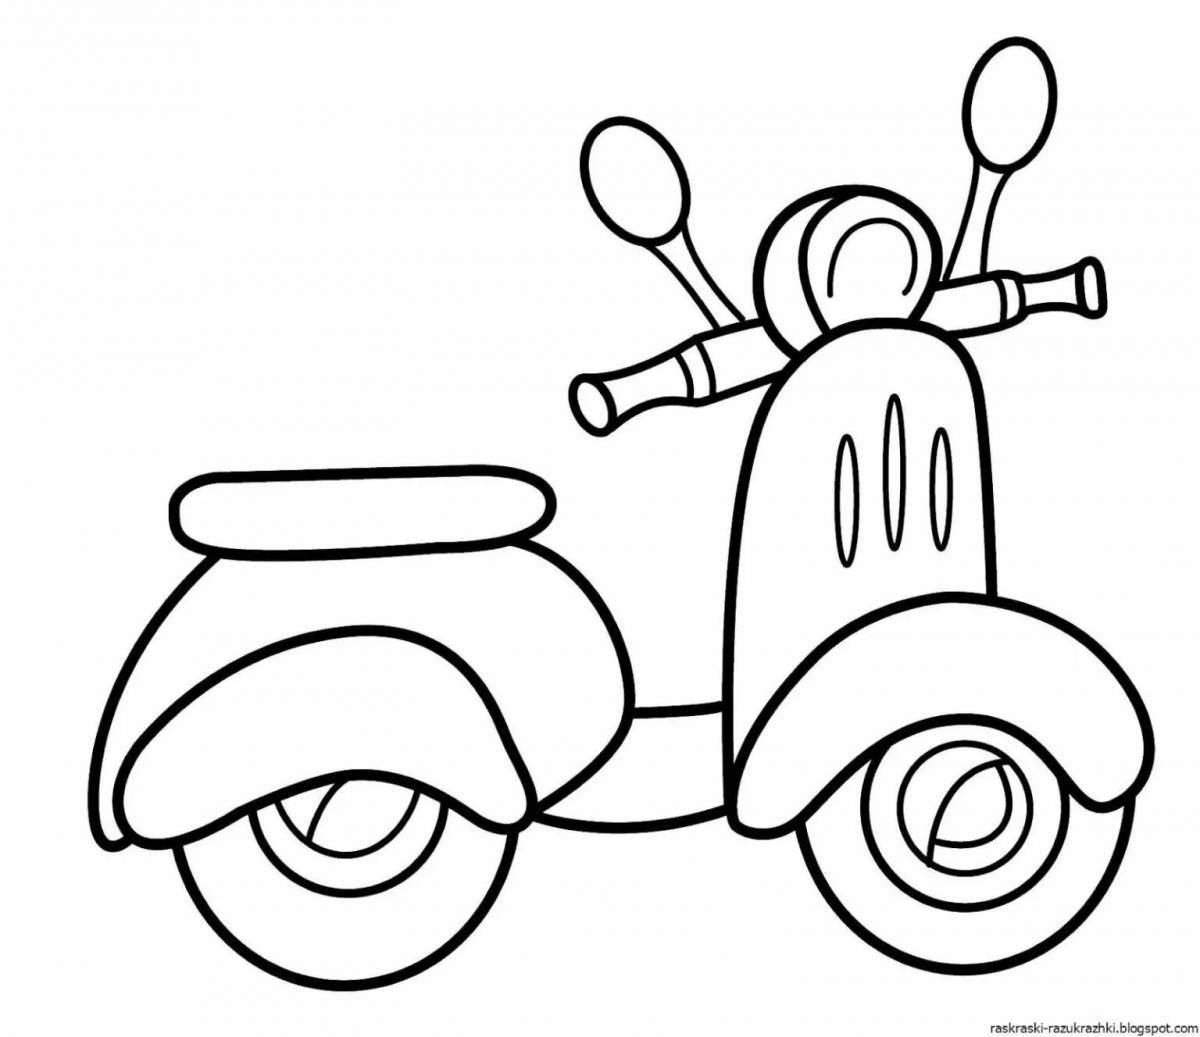 Tempting transport coloring book for toddlers